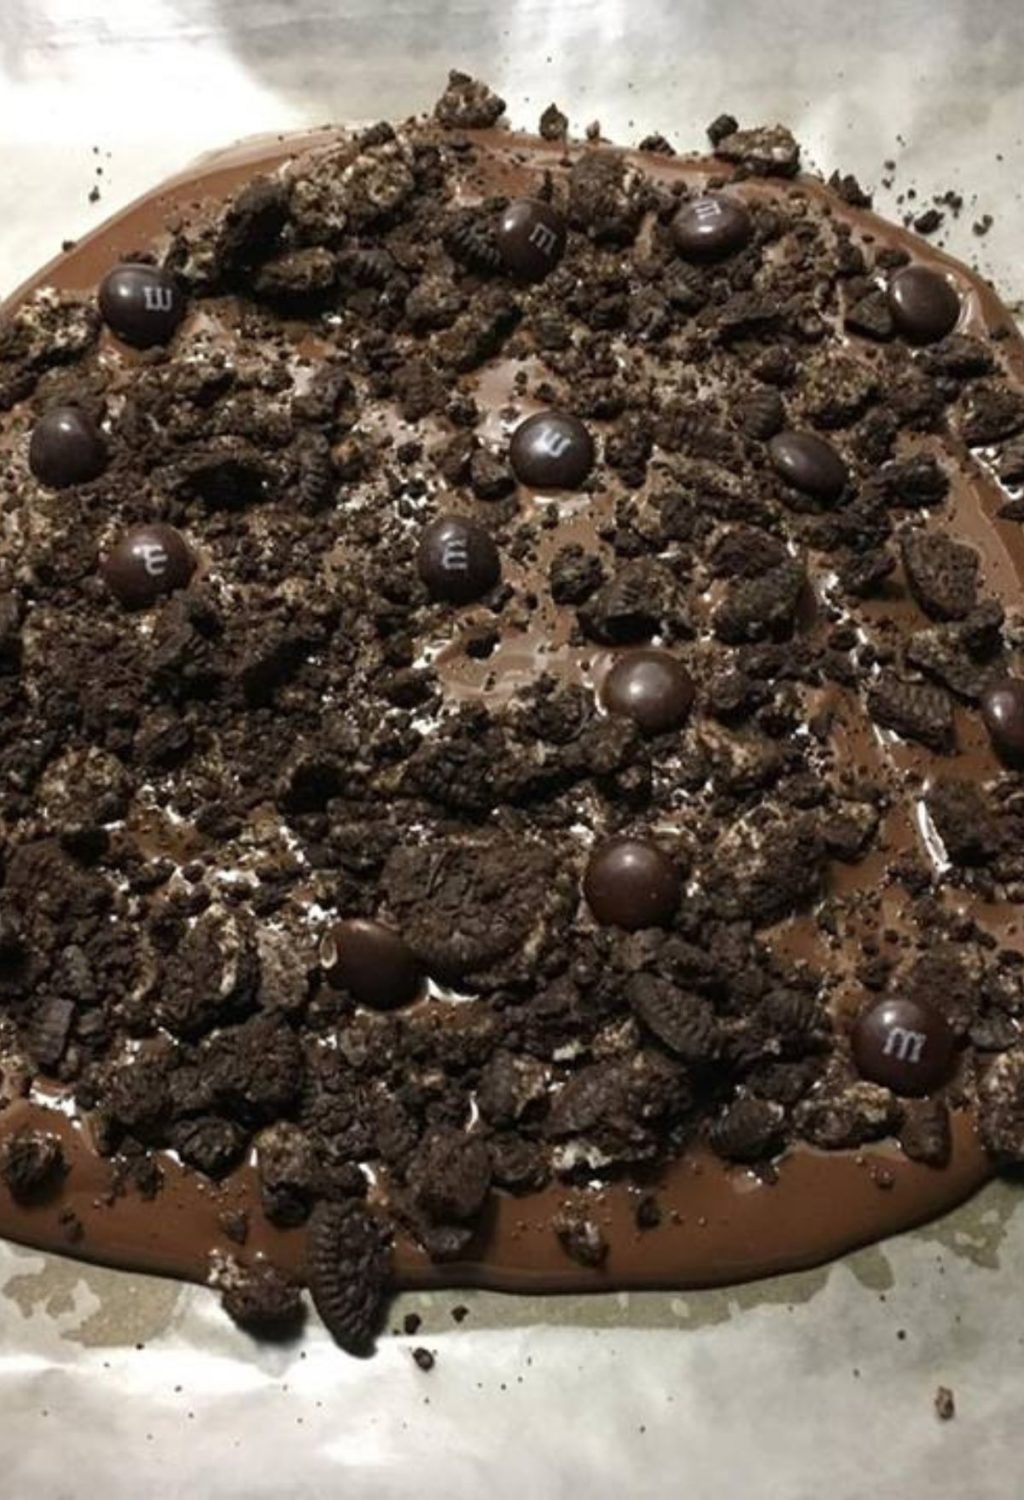 An oreo cookie covered in chocolate chips and oreos.